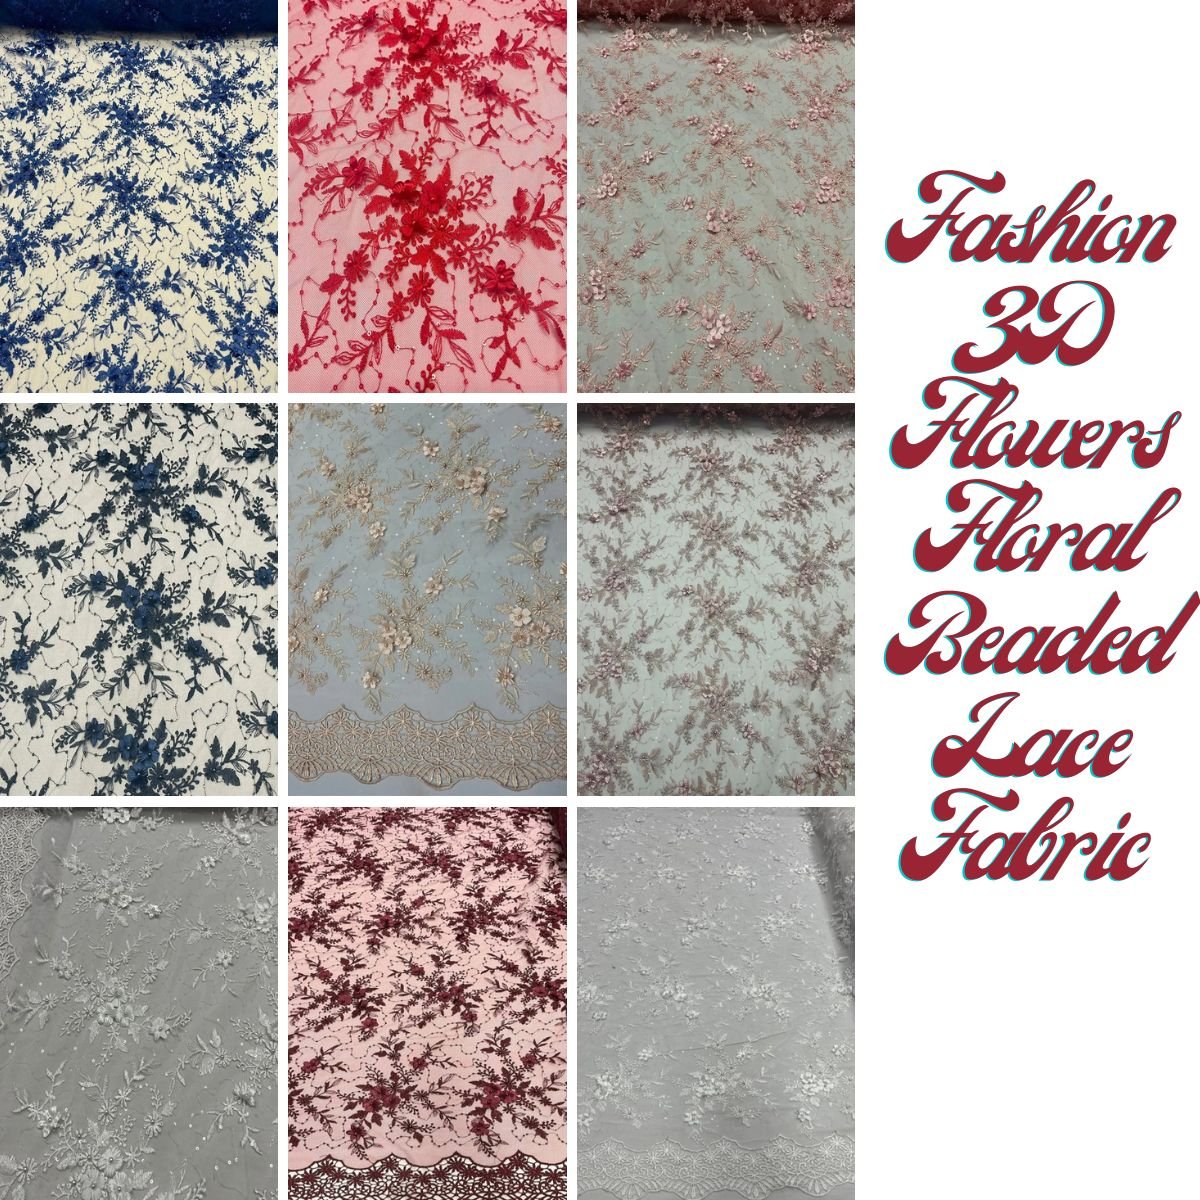 Fashion 3D Flowers Floral Beaded Lace Fabric